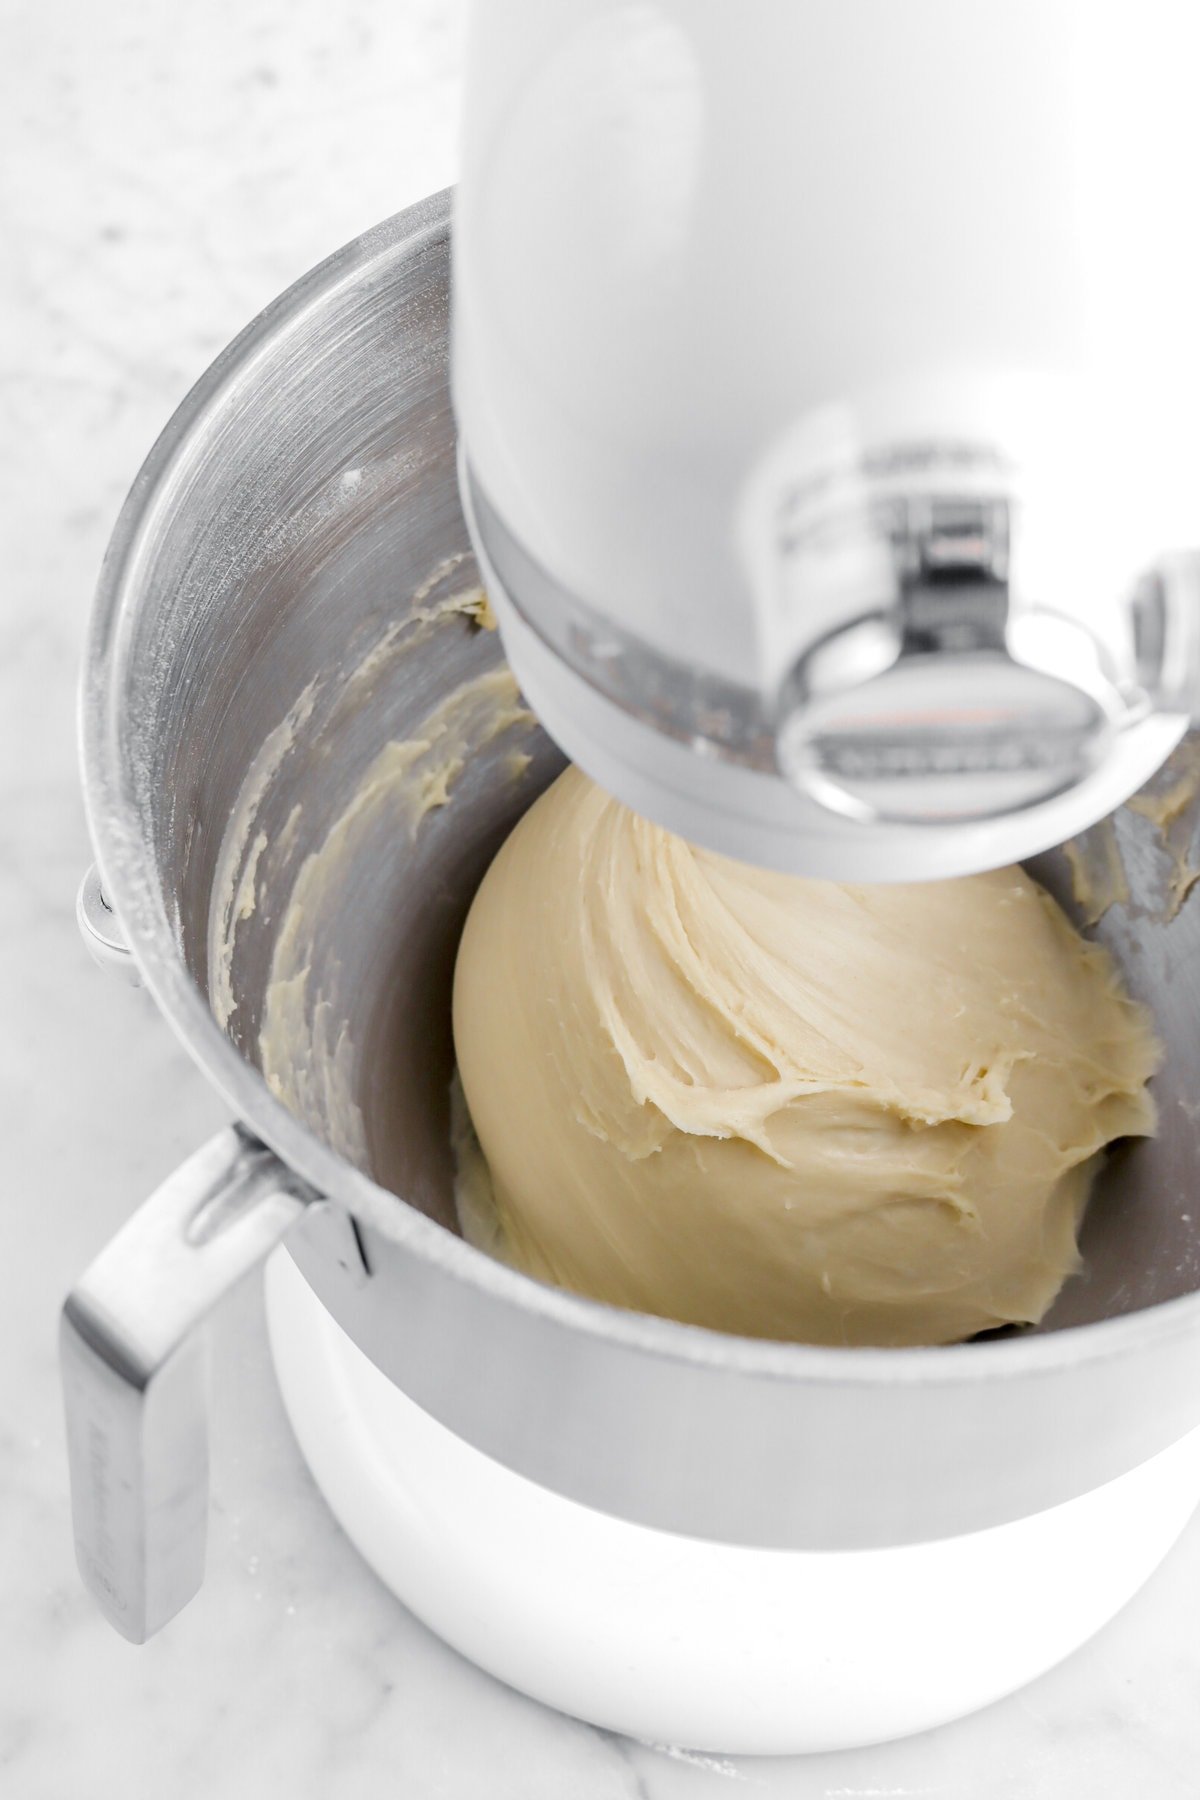 smooth dough in stand mixer.